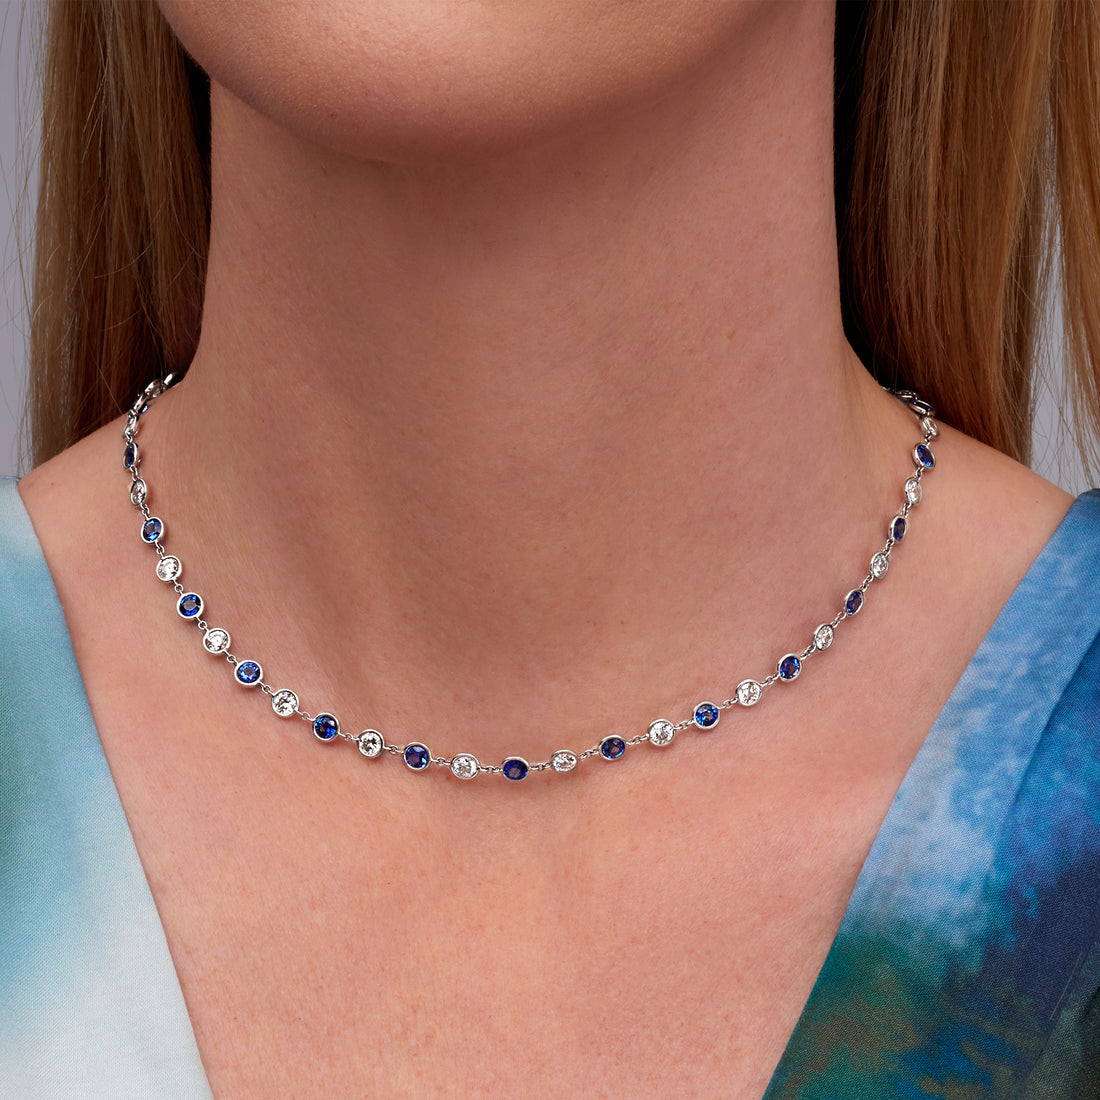 12.9 CT. Alternating Round Brilliant Diamond and Blue Sapphire Bezel Set Necklace in 14K White Gold